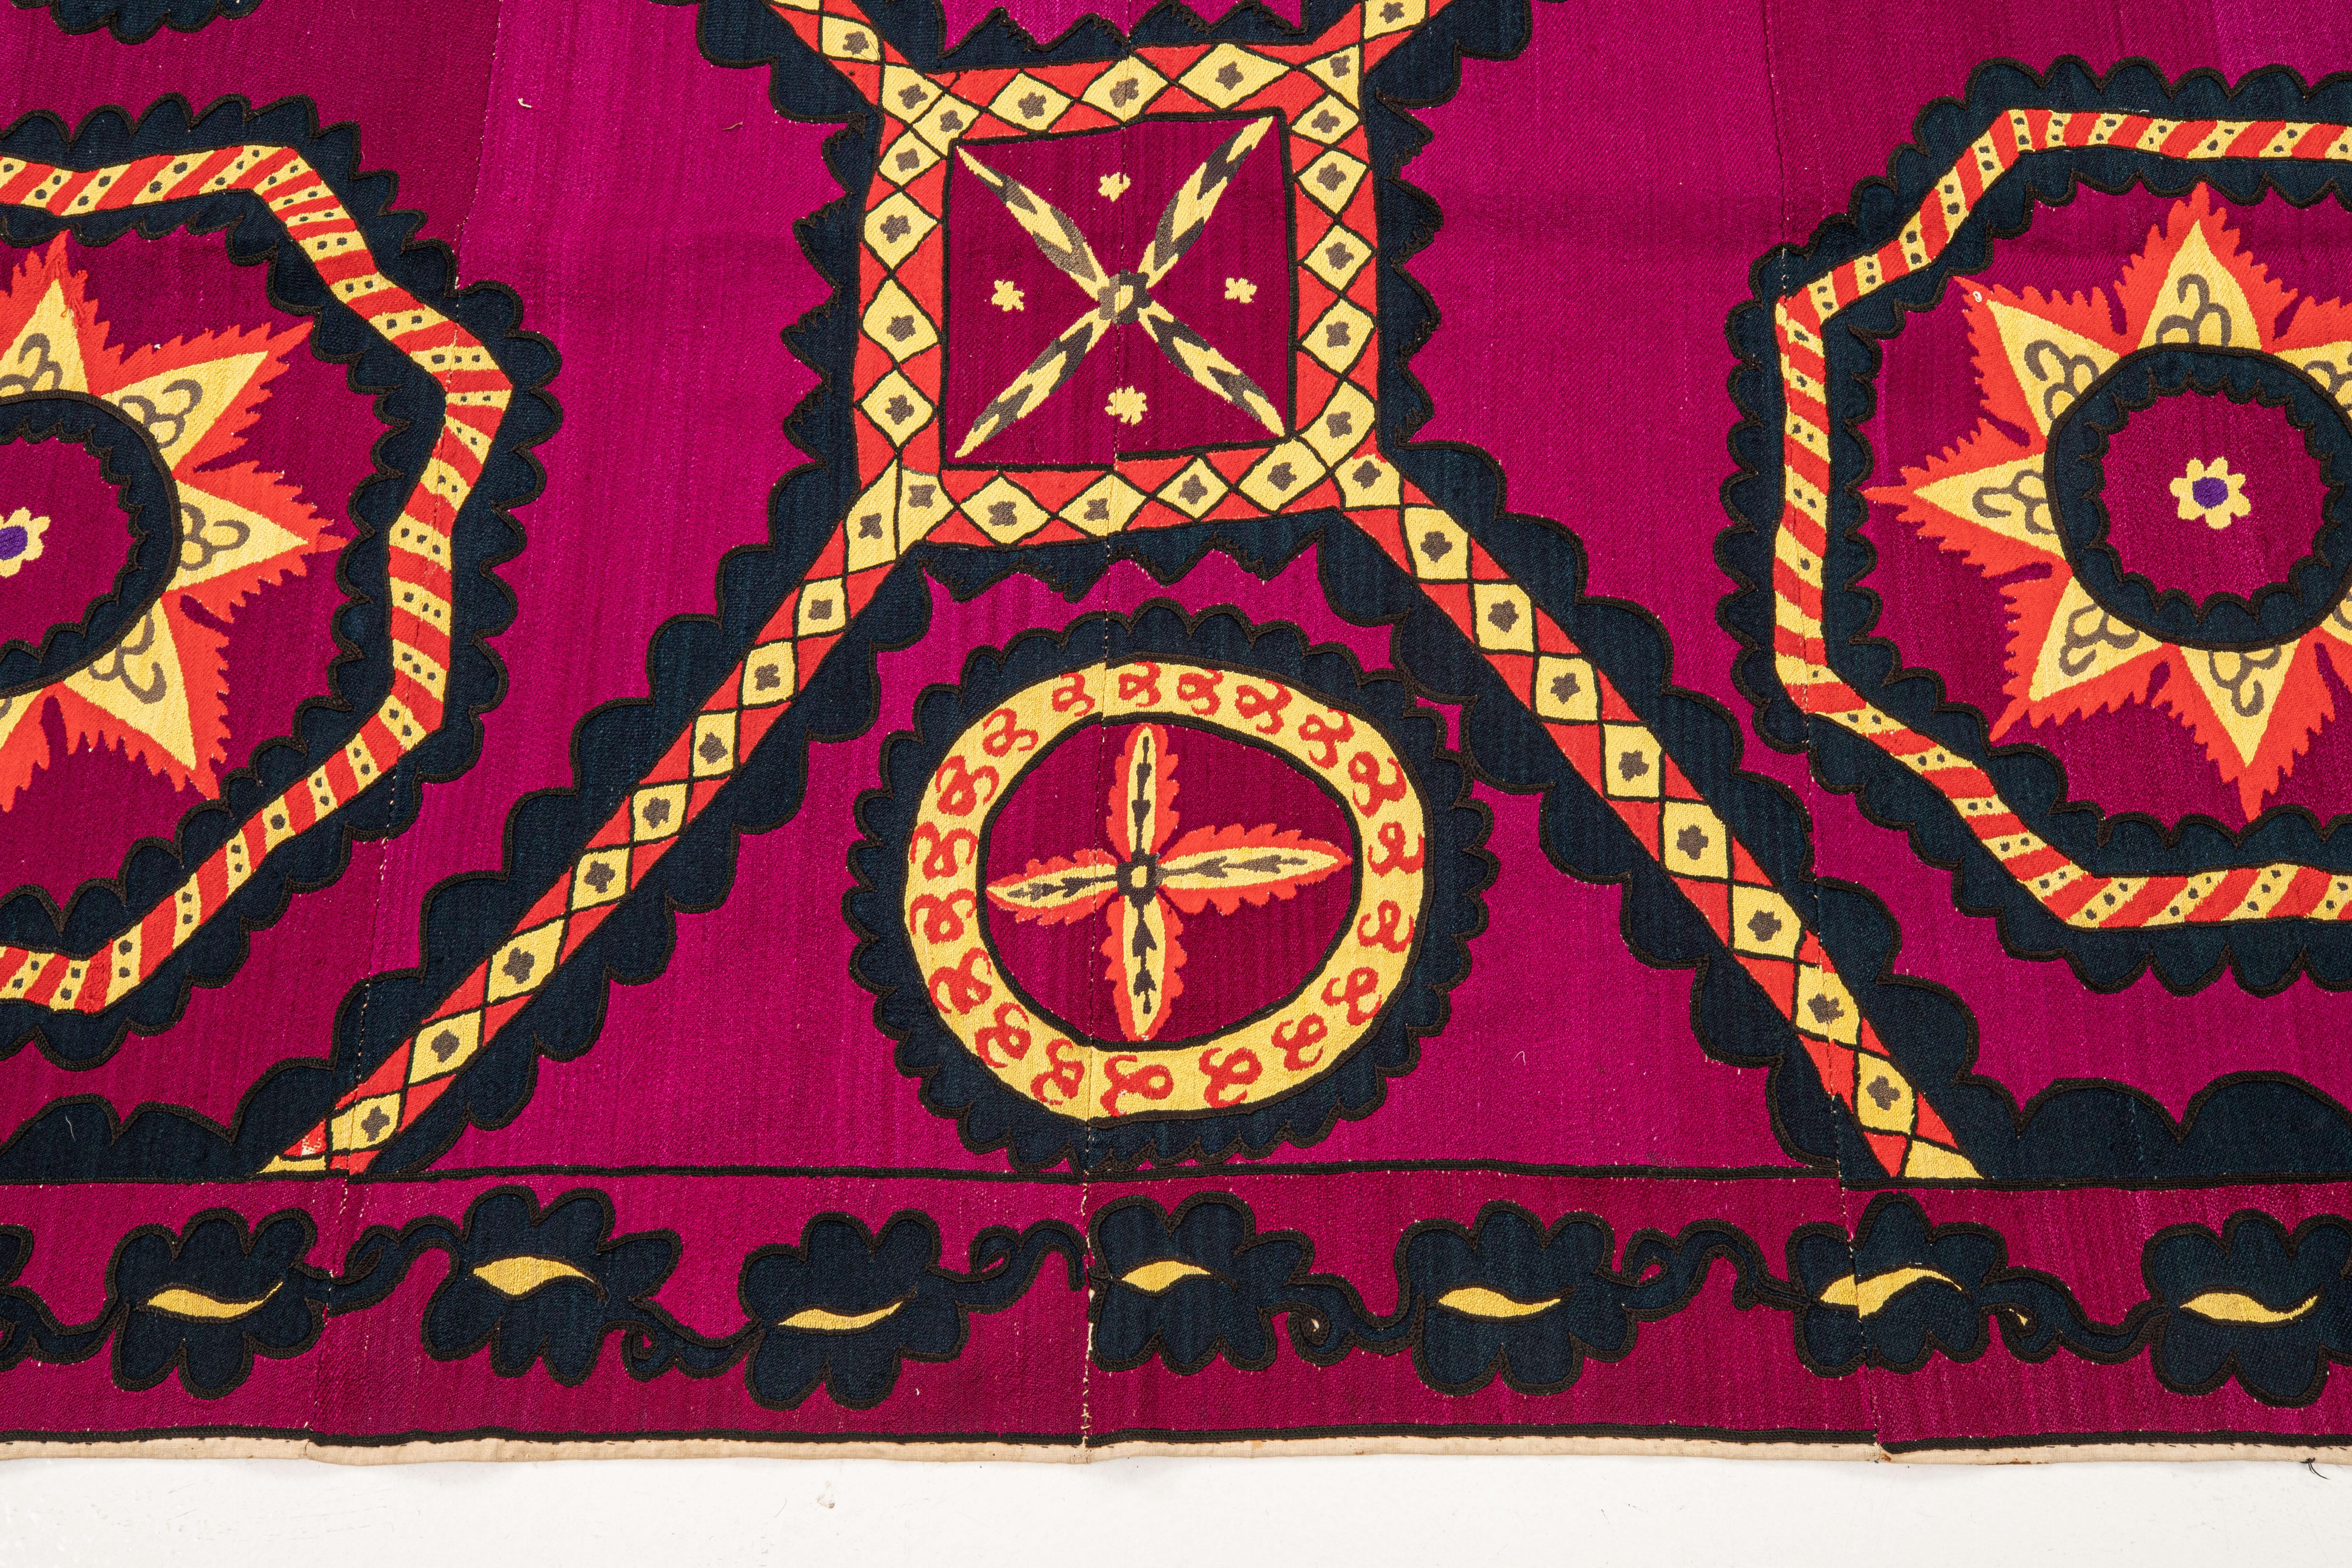 A lage finely embroidered, all over embroidered Suzani from the turn of the 20th century.